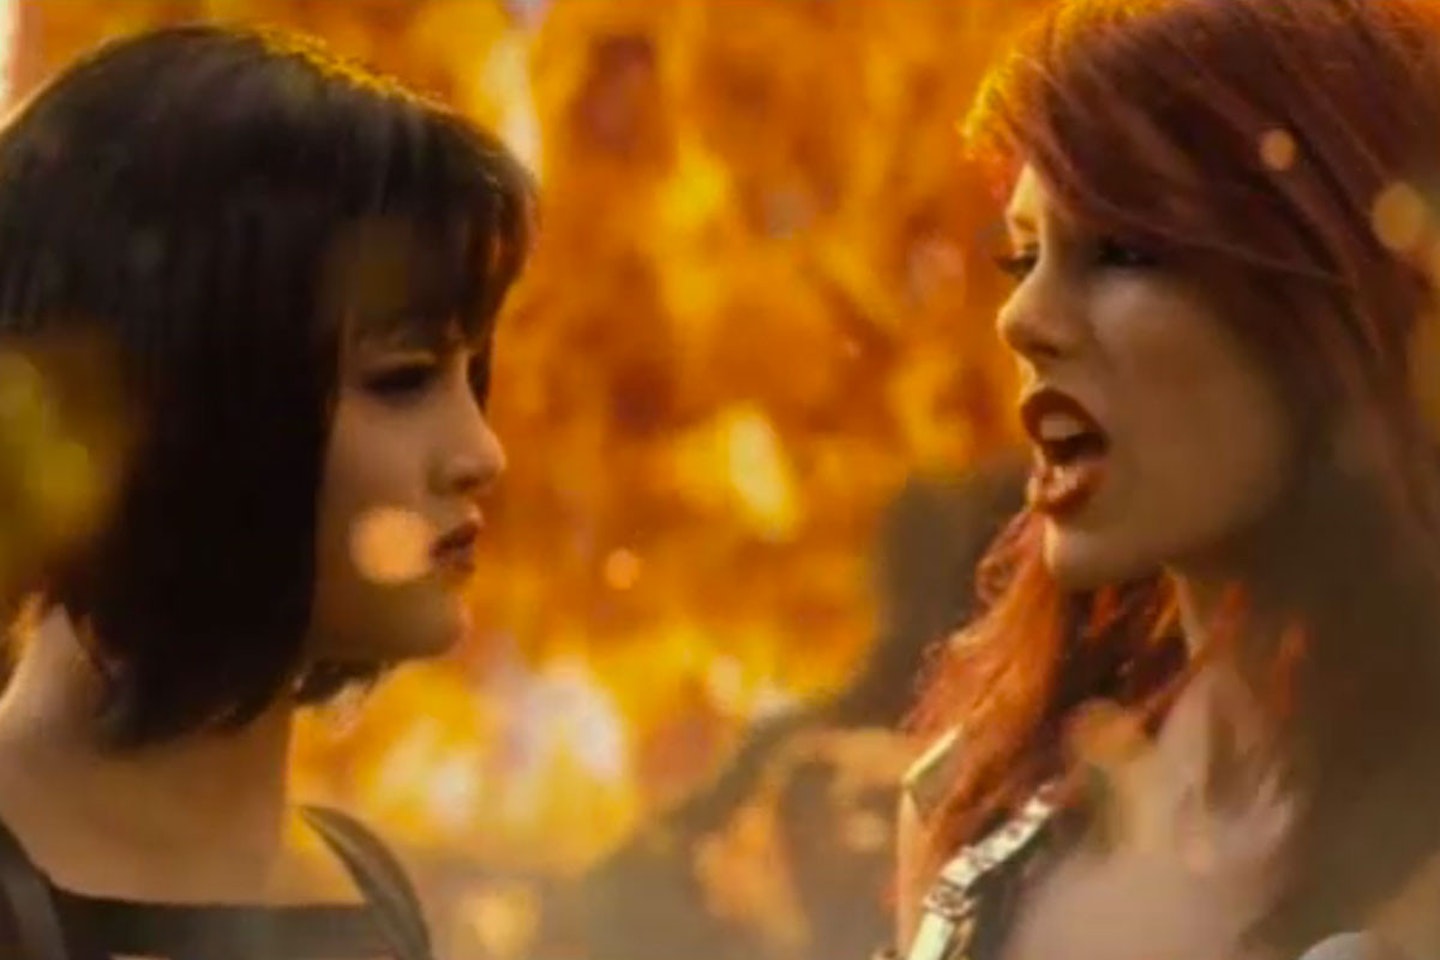 Selena featured as the "bad guy" in Taylor's music video for track Bad Blood.